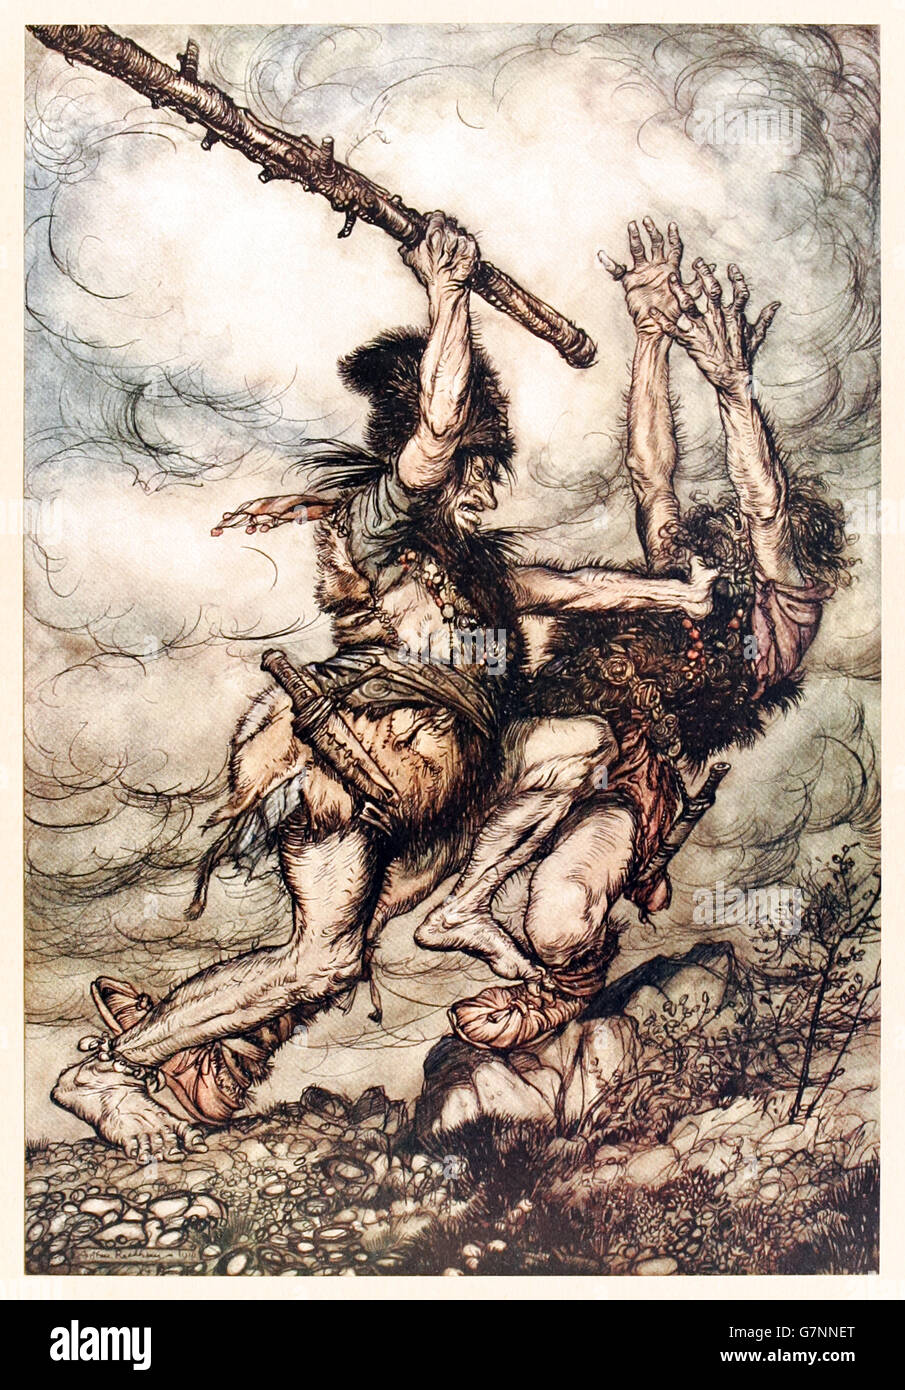 “Fafner kills Fasolt”  from ‘The Rhinegold & the Valkyrie’ illustrated by Arthur Rackham (1867-1939), published in 1910. Fafner clubs Fasolt to death due to Alberich's terrible 'Death-Curse' on the ring. Stock Photo